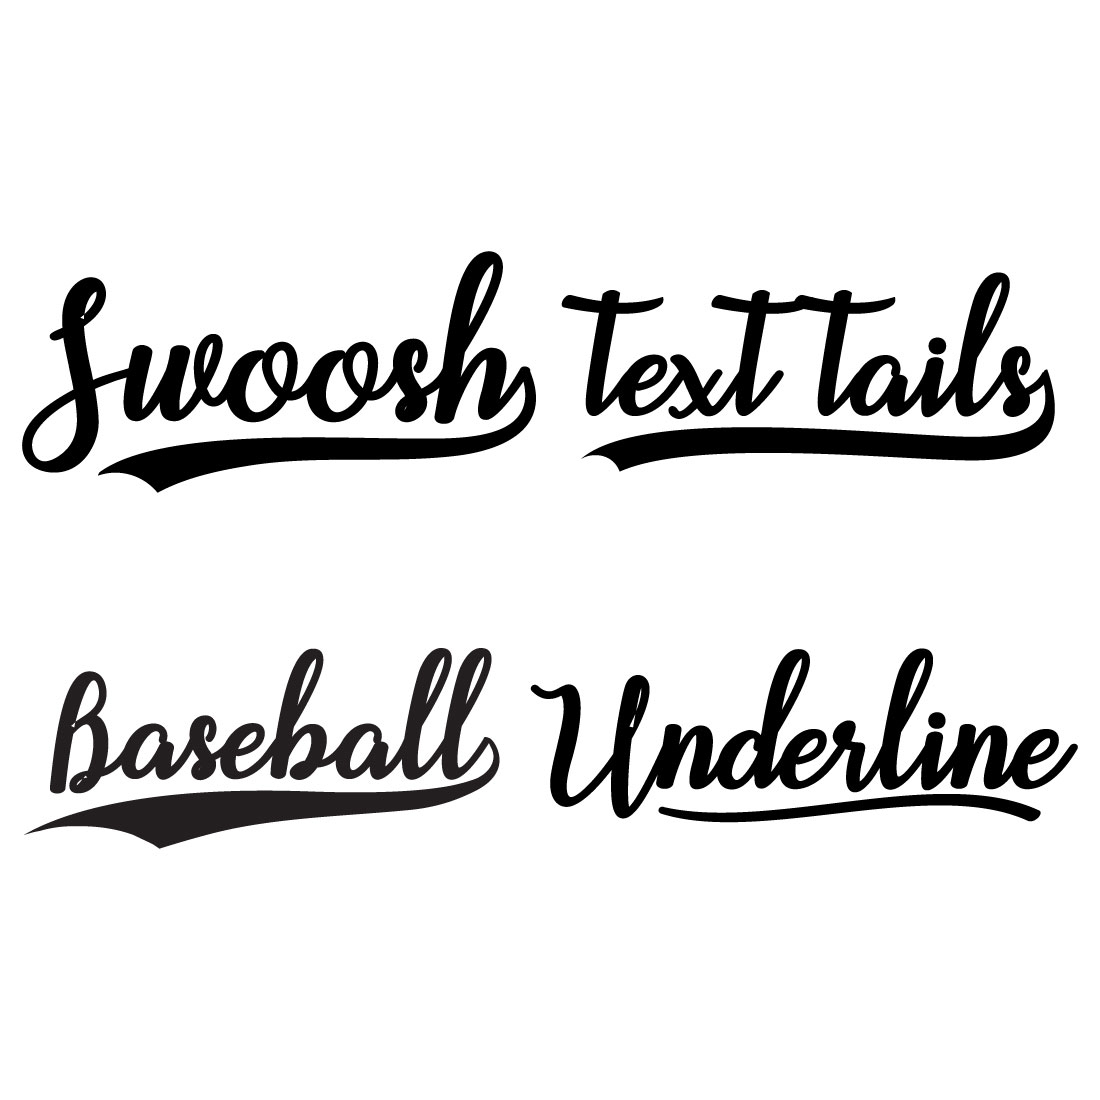 Text tail typography Swoosh baseball Sign text ornaments vector preview image.